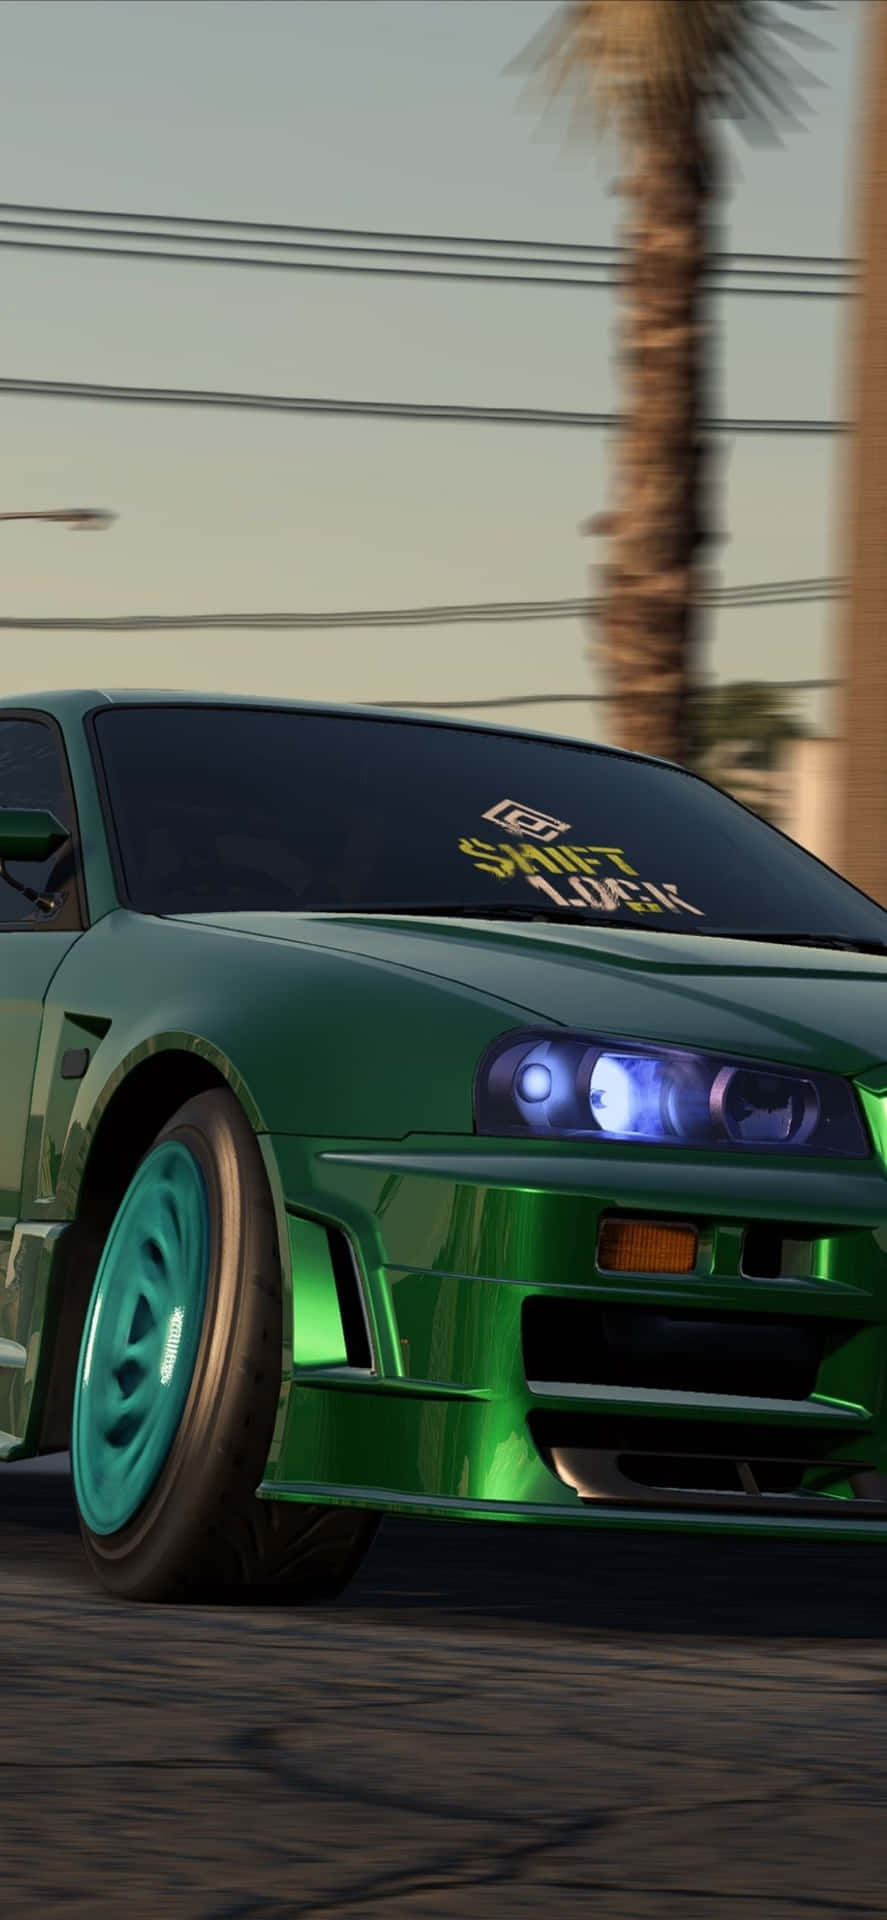 Iphone Xs Need For Speed Payback Background Dark Green Modded Car